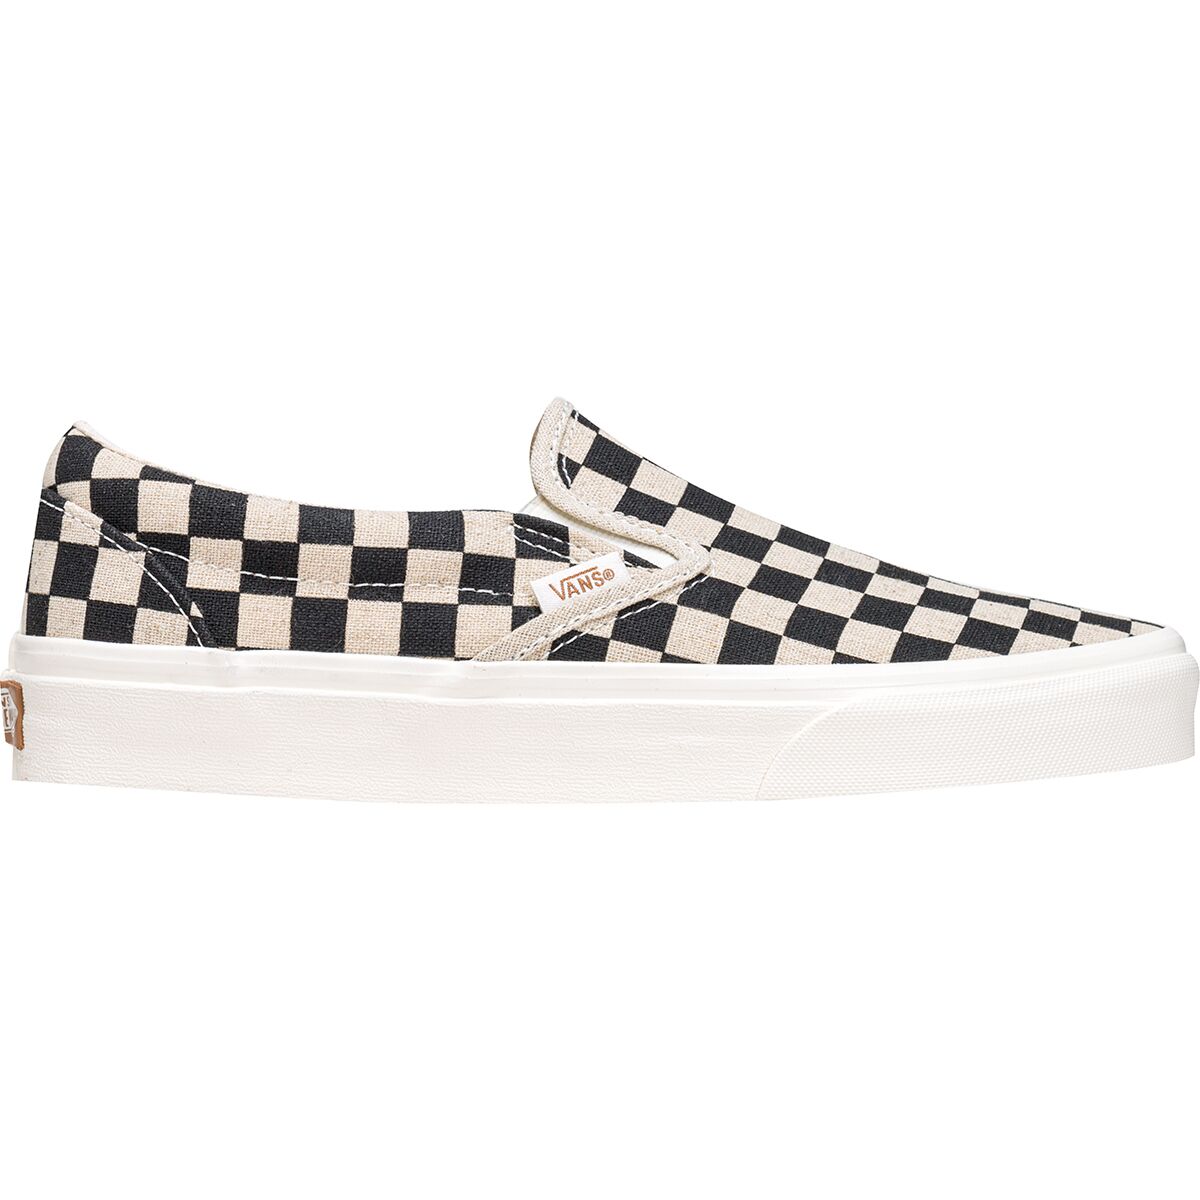 Vans Eco Theory Classic Slip-On Checkerboard Shoe